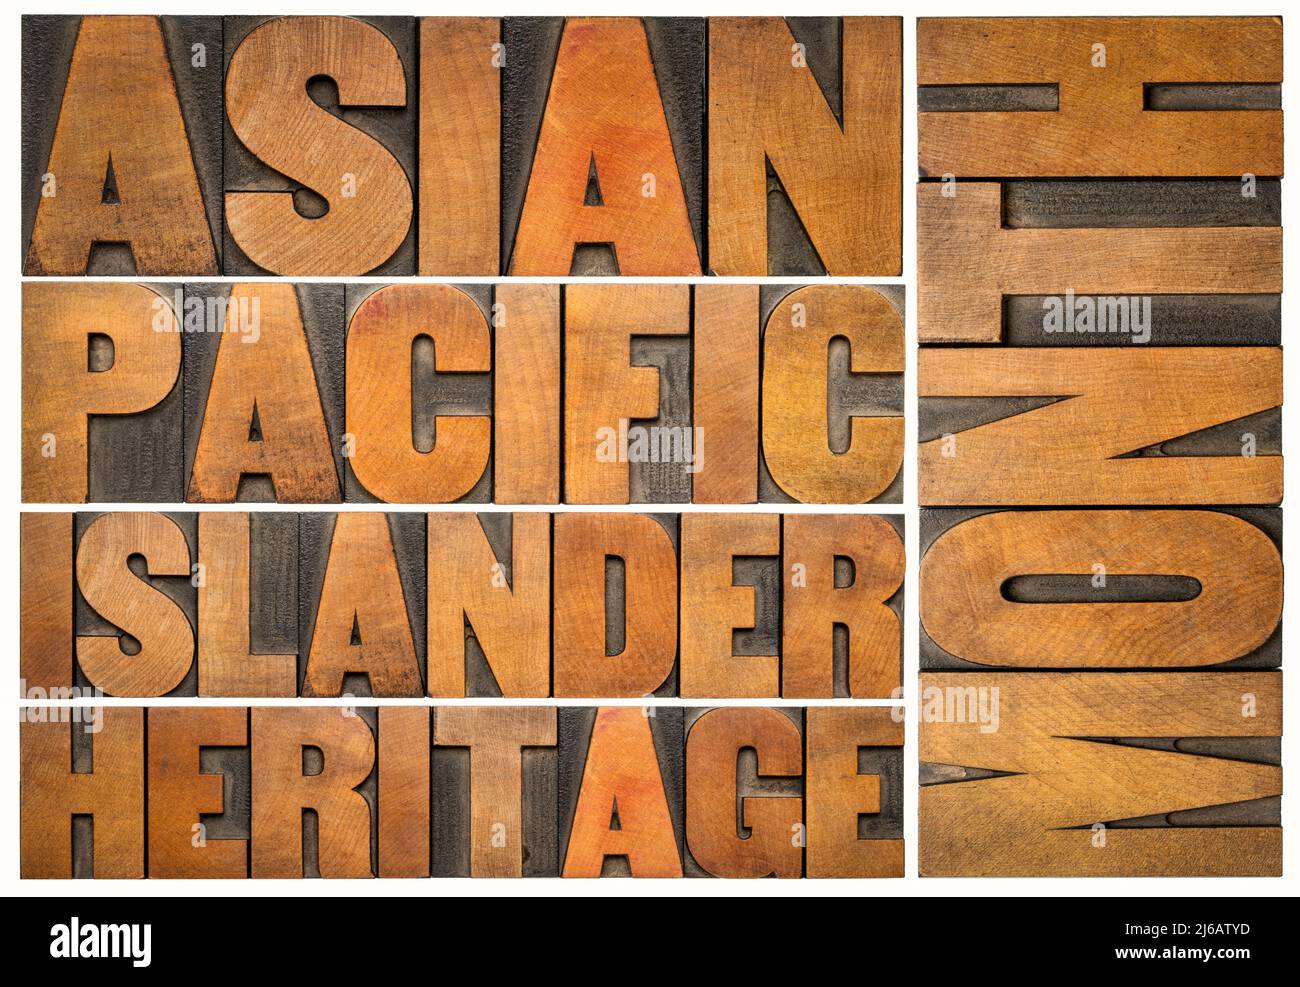 Asian Pacific Islander Heritage Month - isolated word abstract in vintage letterpress wood type, reminder of cultural event Stock Photo